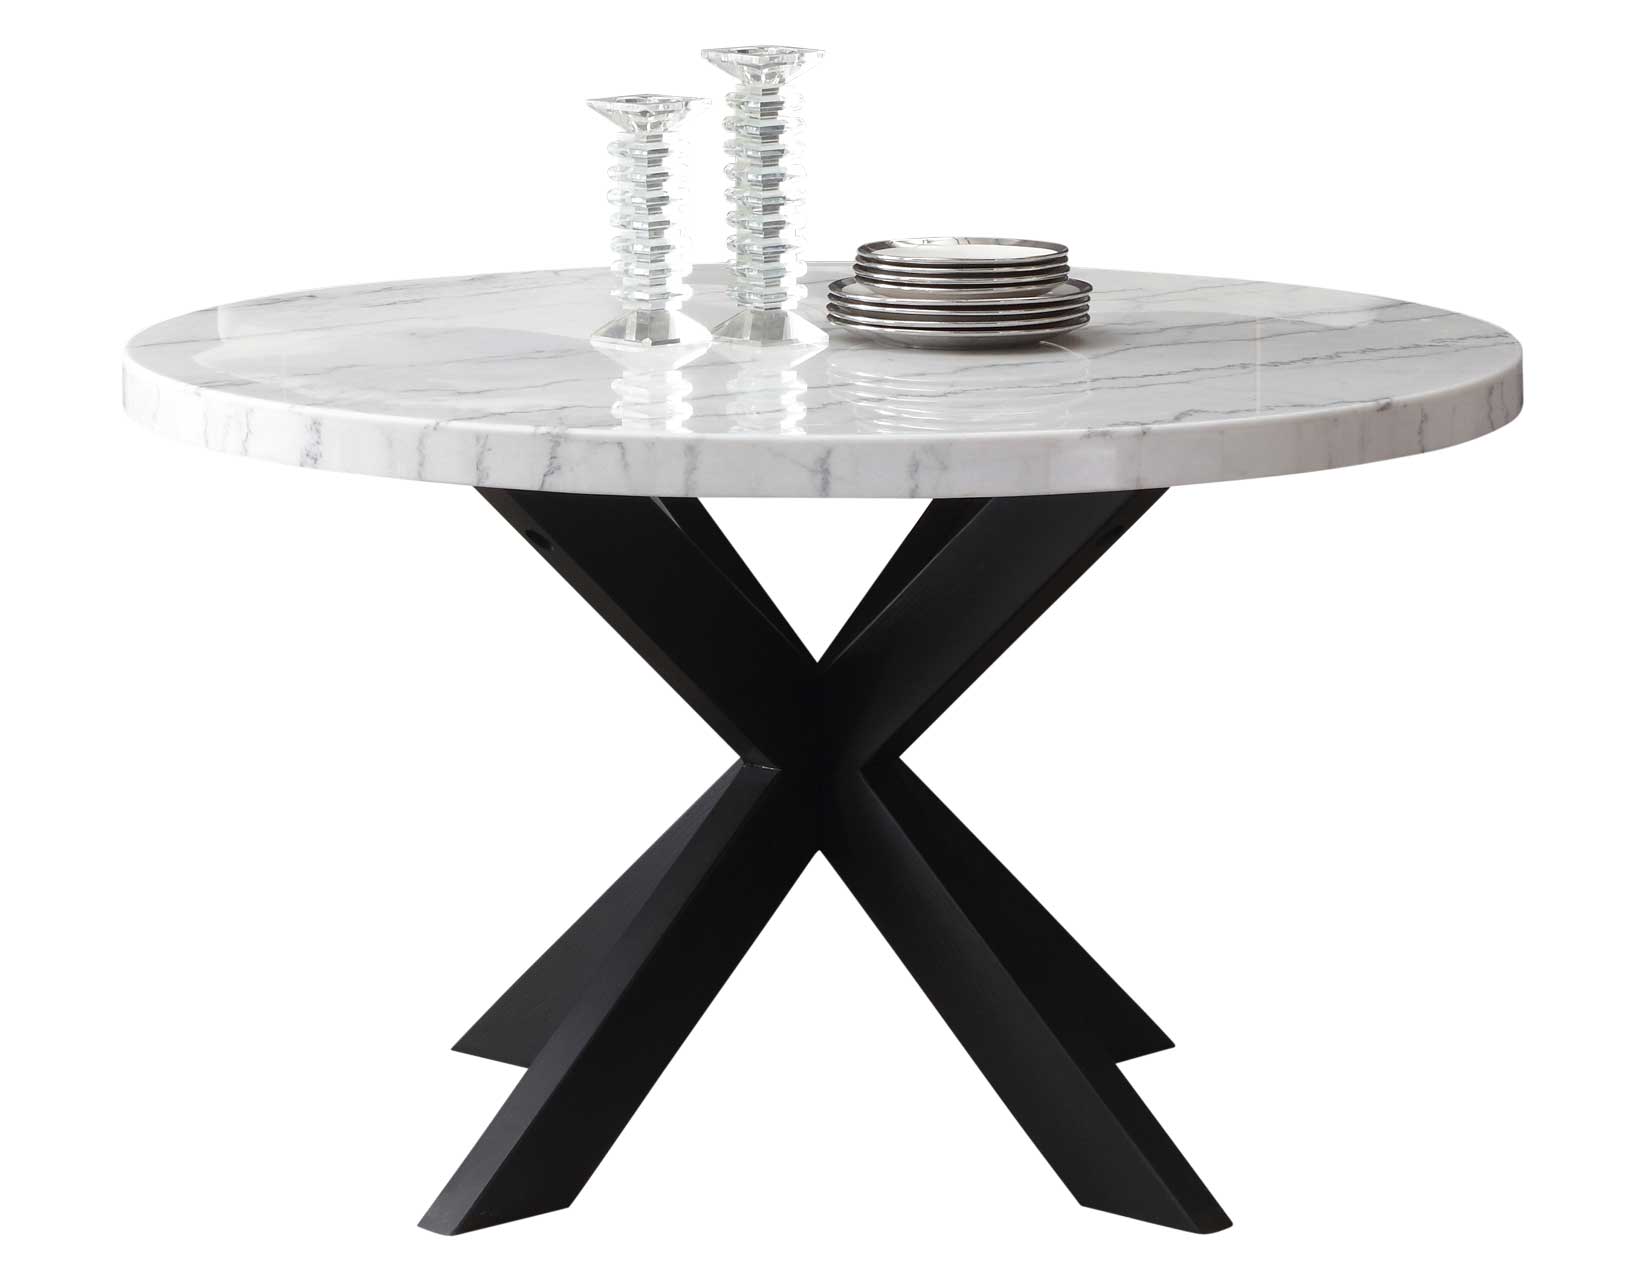 Xena 52-inch Round Dining Table, White Marble Top - DFW